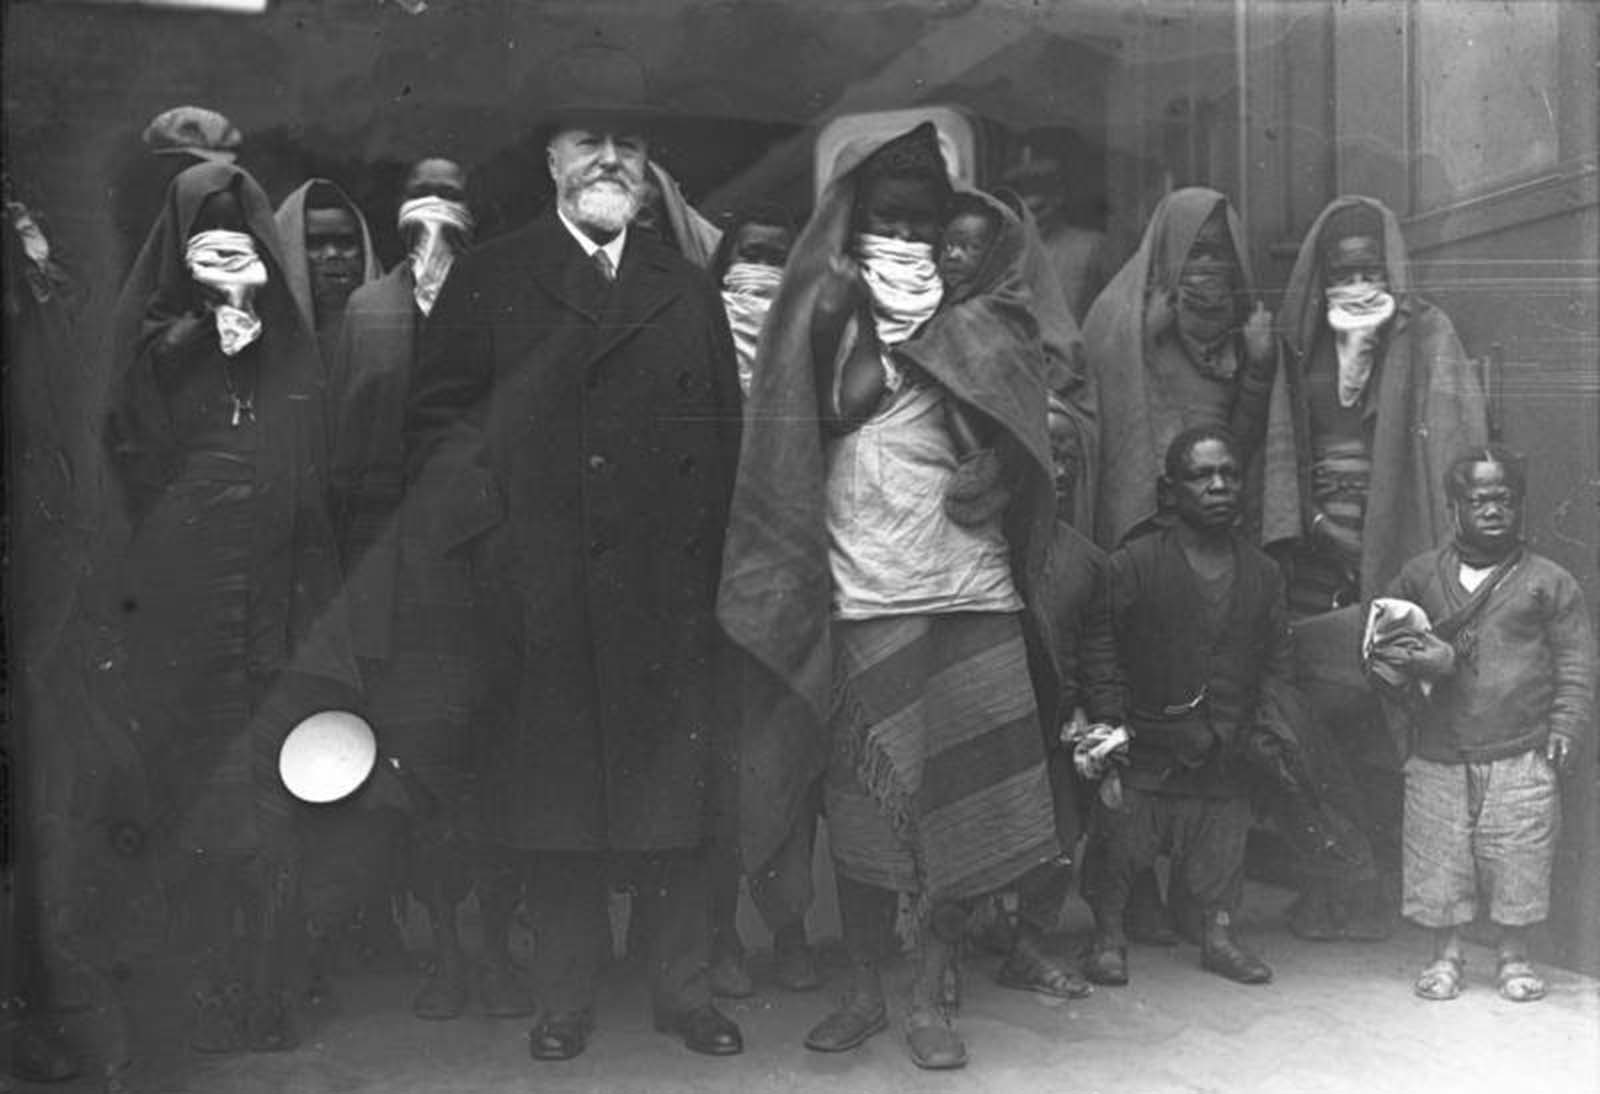 Professor Lutz Heck, director of the Berlin Zoo, arrives in Berlin, 1931. With him are members of the African Sara-Kaba tribe, who will soon be put on display. The scarves over the women’s mouths are covering their lip plates.